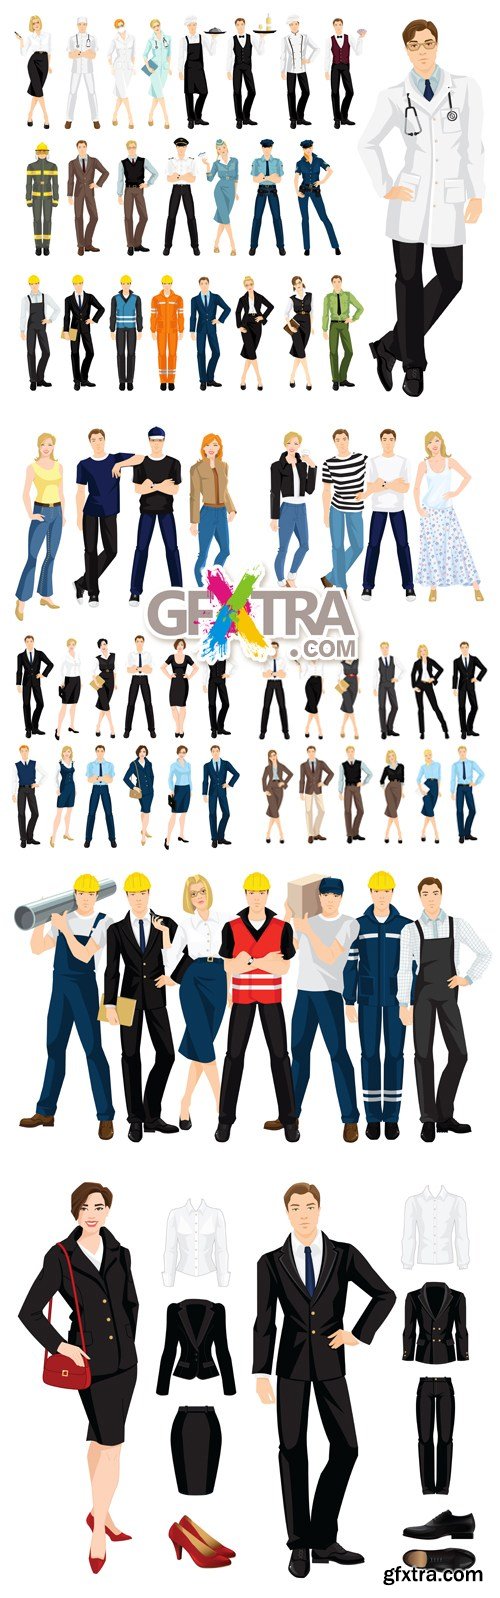 People, Professions Icons Vector